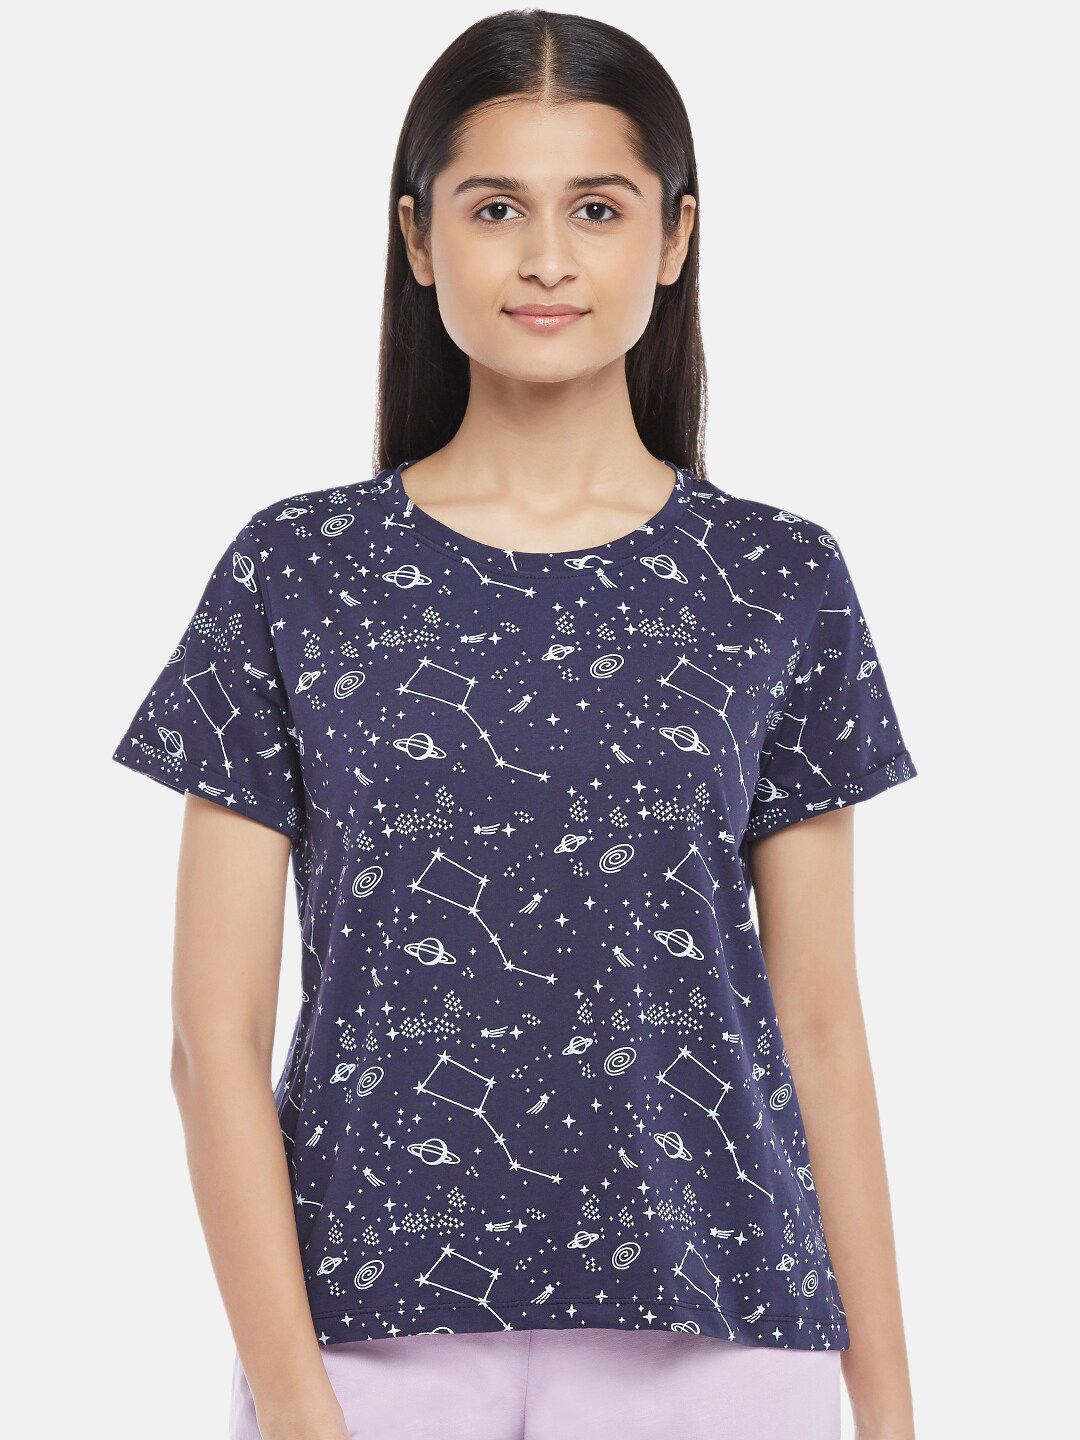 Dreamz by Pantaloons Blue Print Cotton Lounge tshirt Price in India